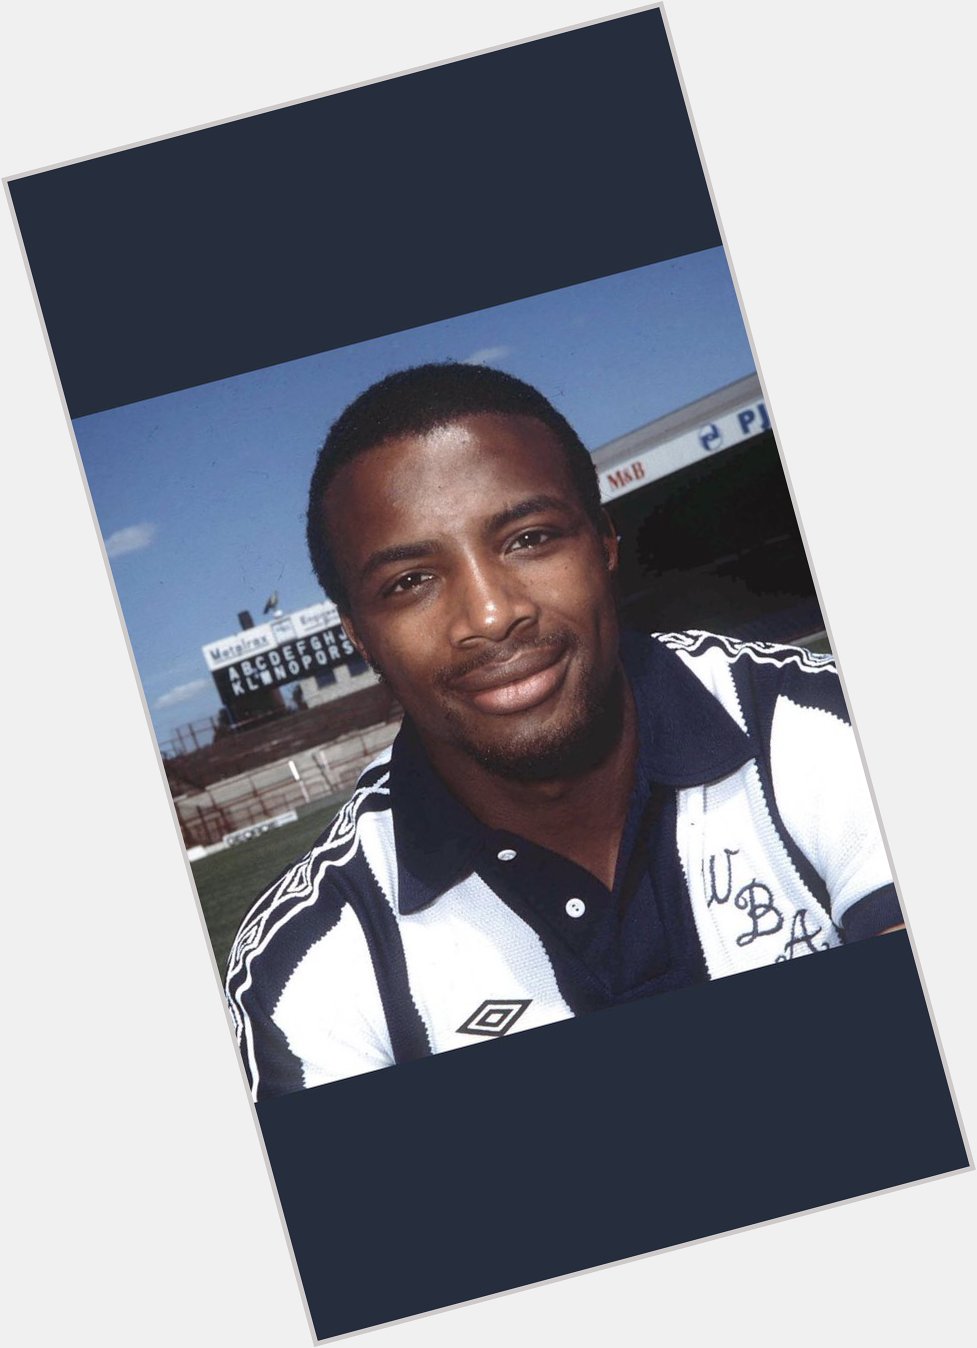 Happy heavenly birthday to the original one and only Cyrille regis 